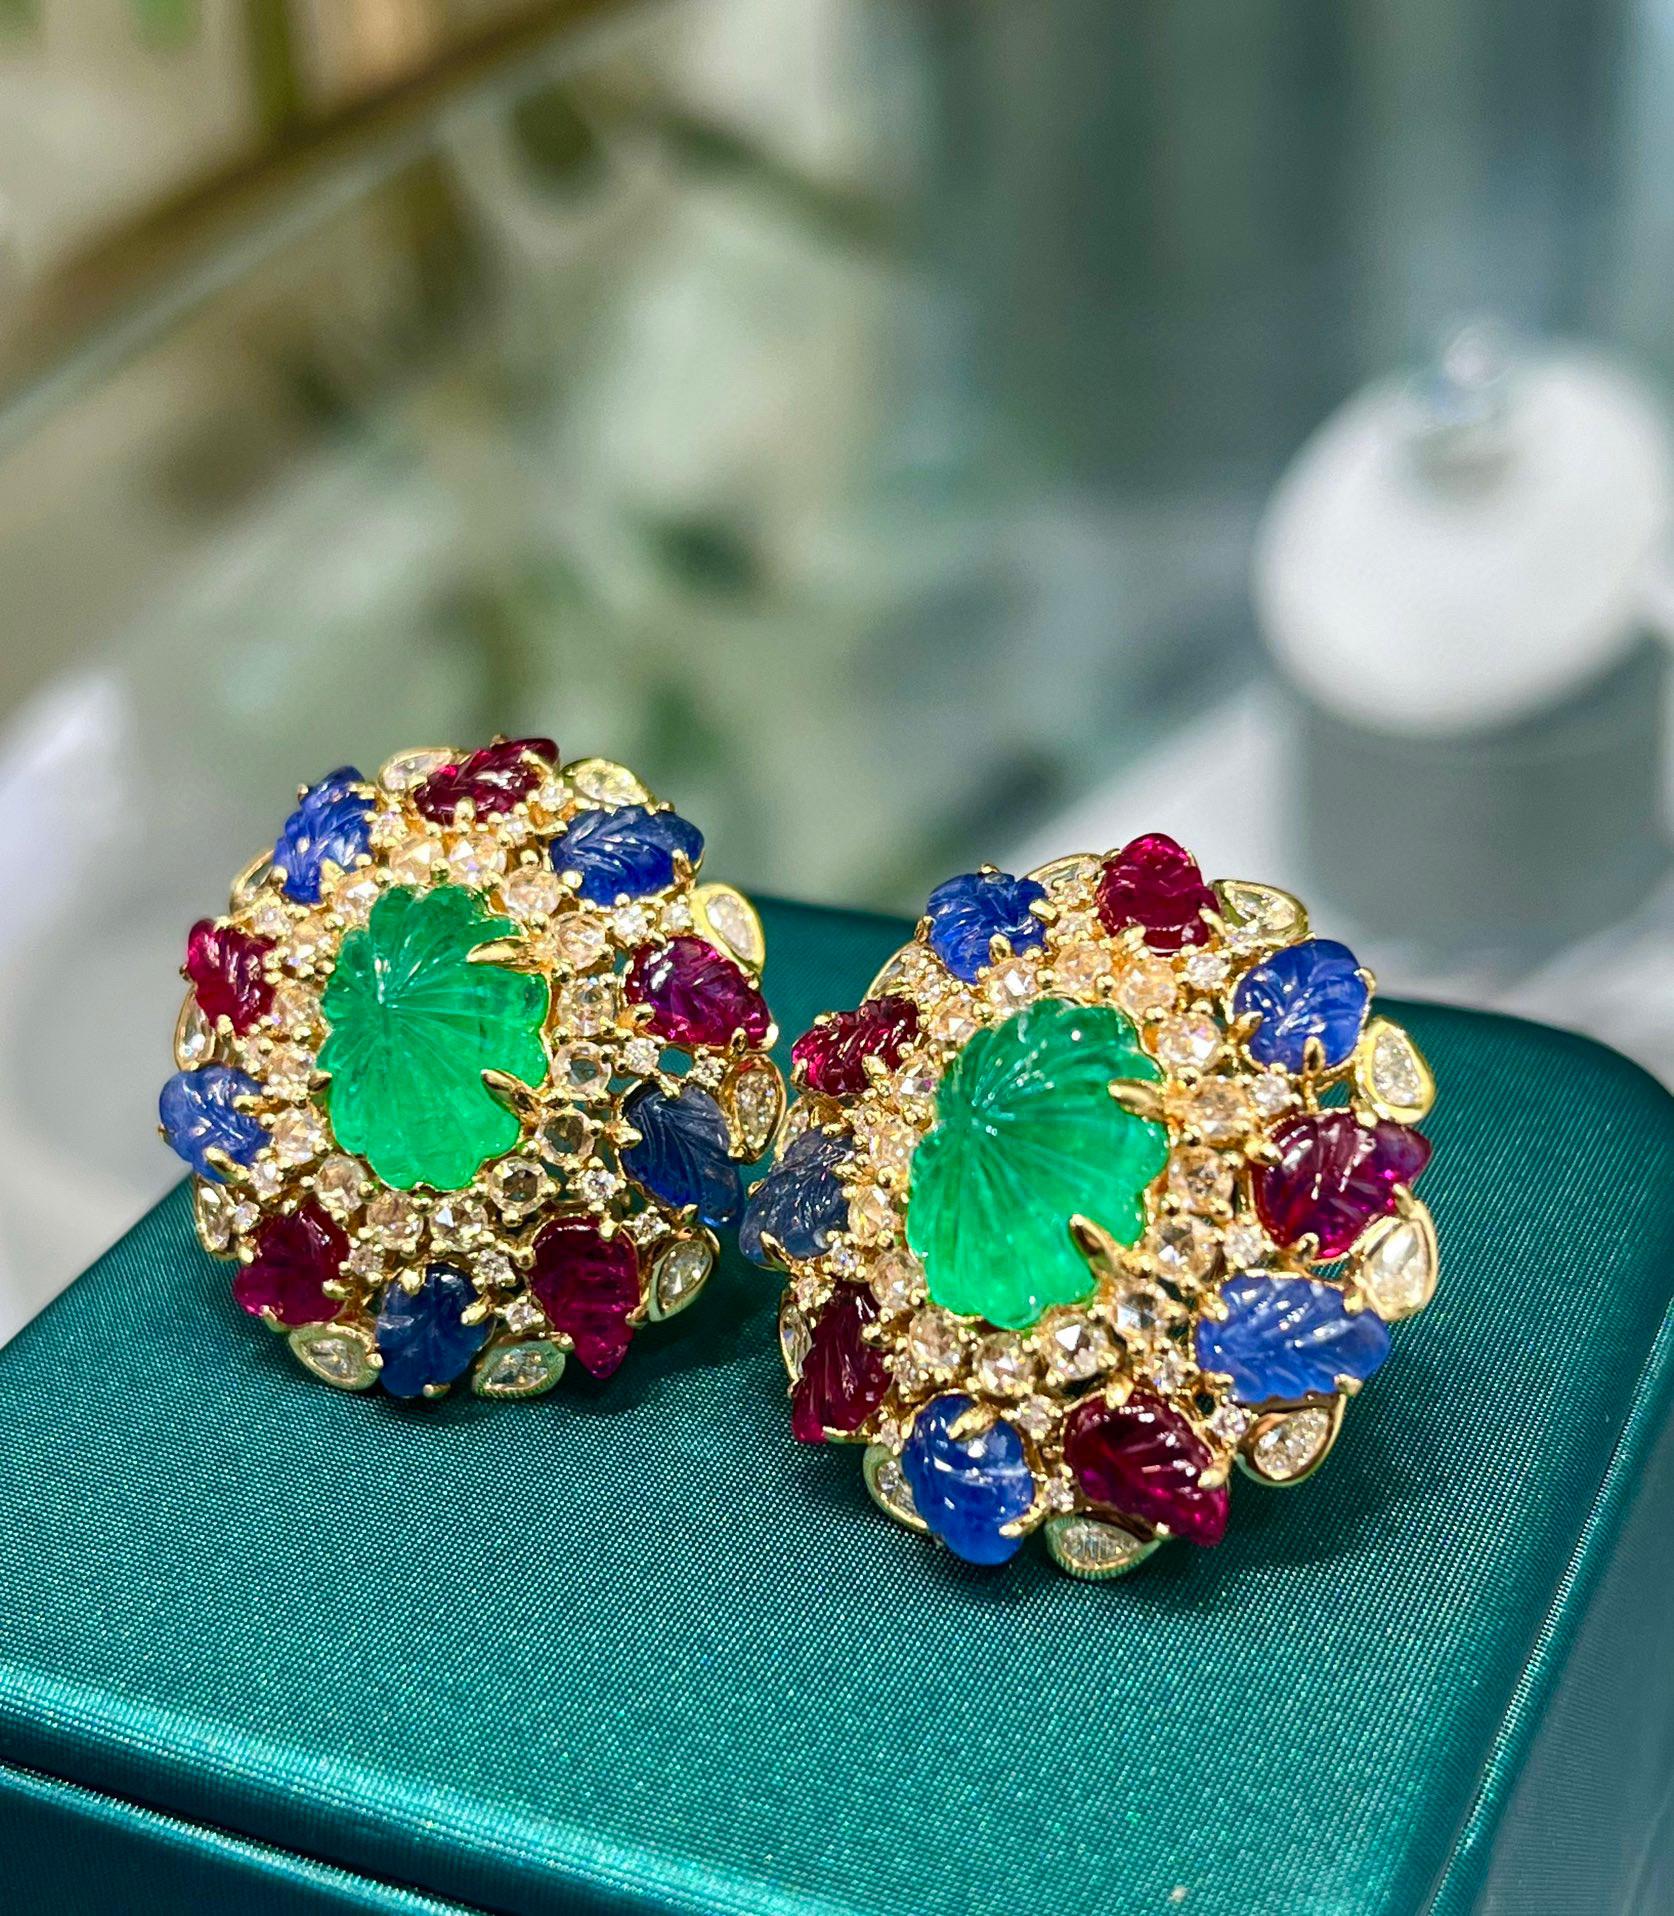 18K Gold Colombian Origin Rubies & Emeralds & Sapphires Earrings with Diamonds

Main Stone Emerald - total 8.85 CT
Colombian Rubies & Sapphires - total 10.785 CT
Diamonds - 2.347 CT
18K Gold
Total Weight - 22.56 GM

Introducing our exquisite 18K